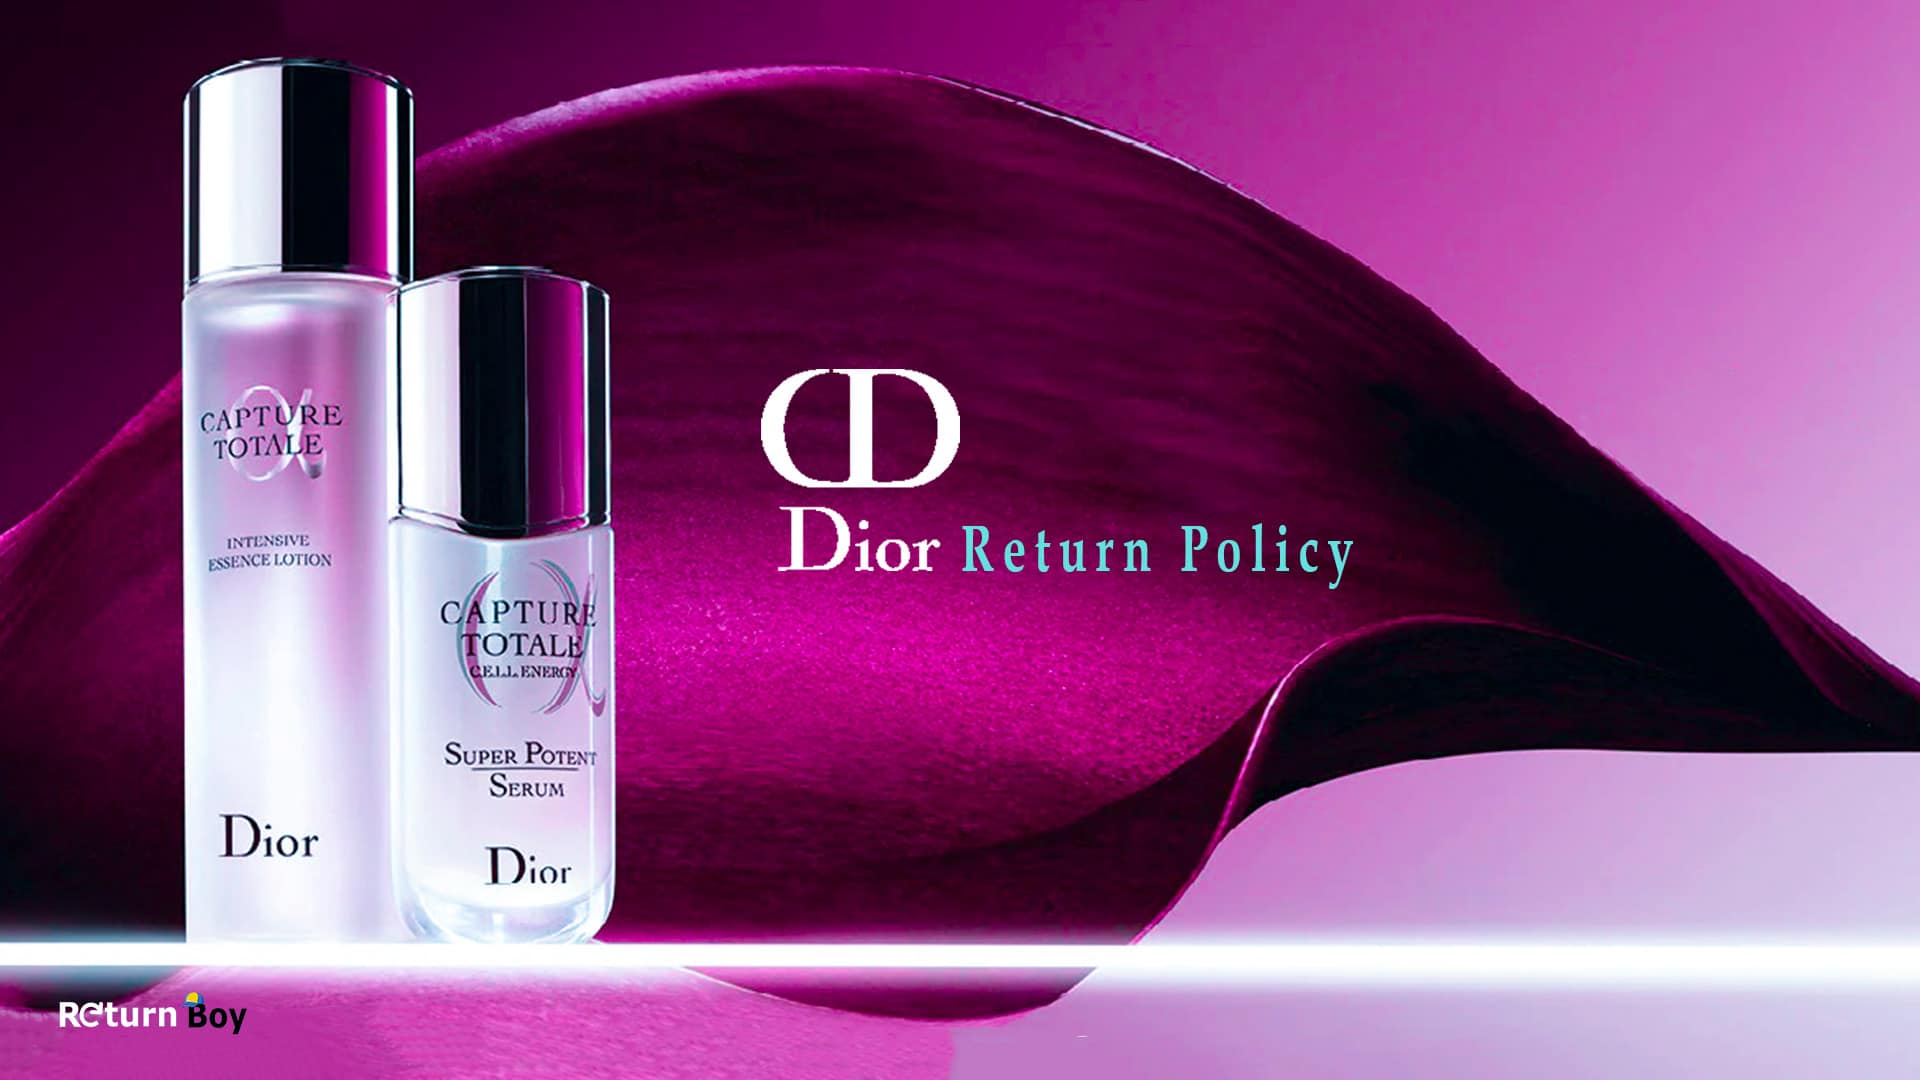 DIOR Returns Policy